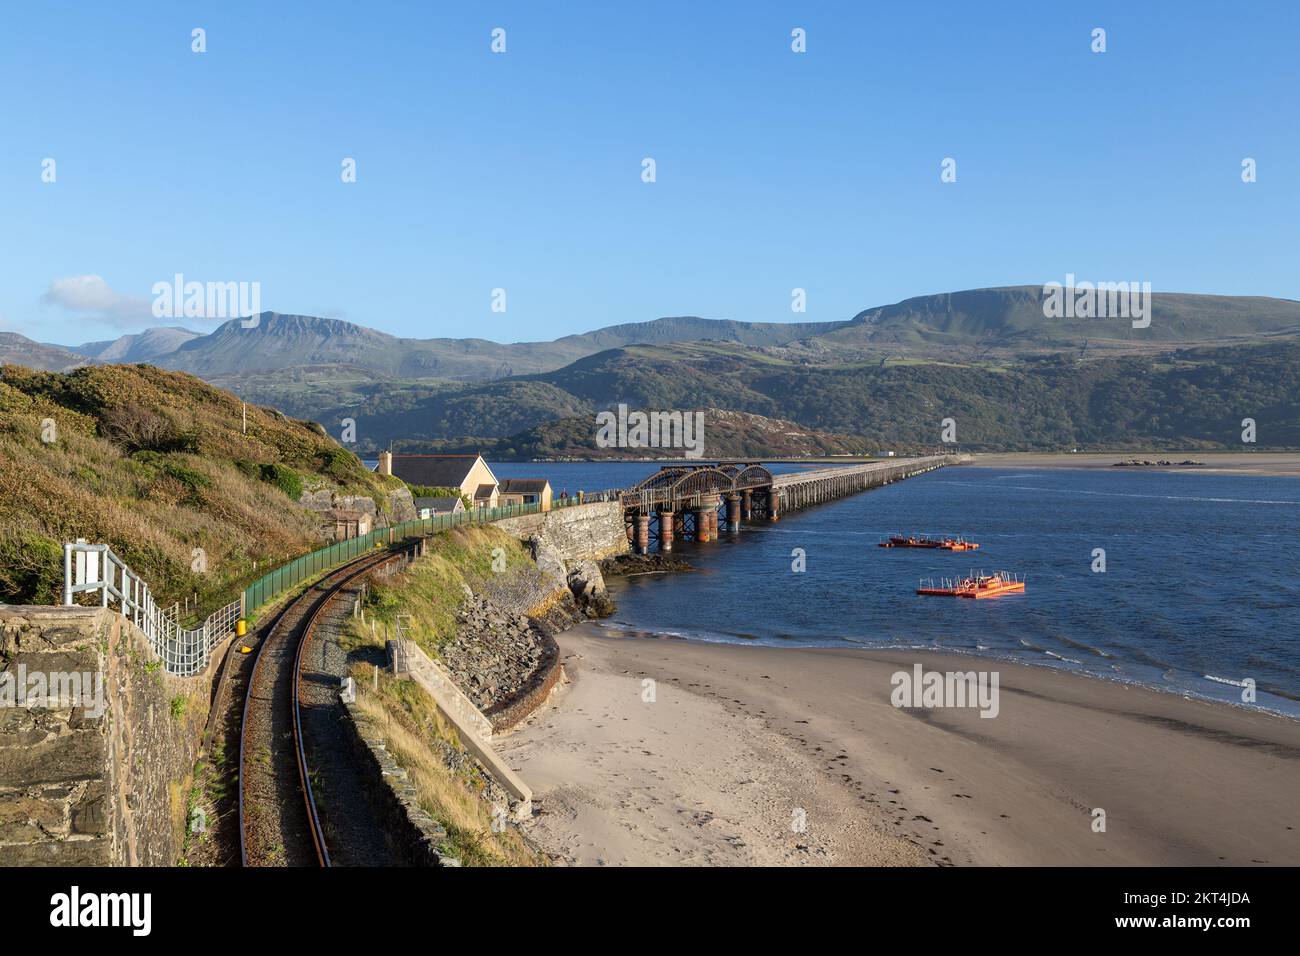 Looking towards Cadair Idris or Cader Idris with the Barmouth railway bridge in the foreground. Stock Photo